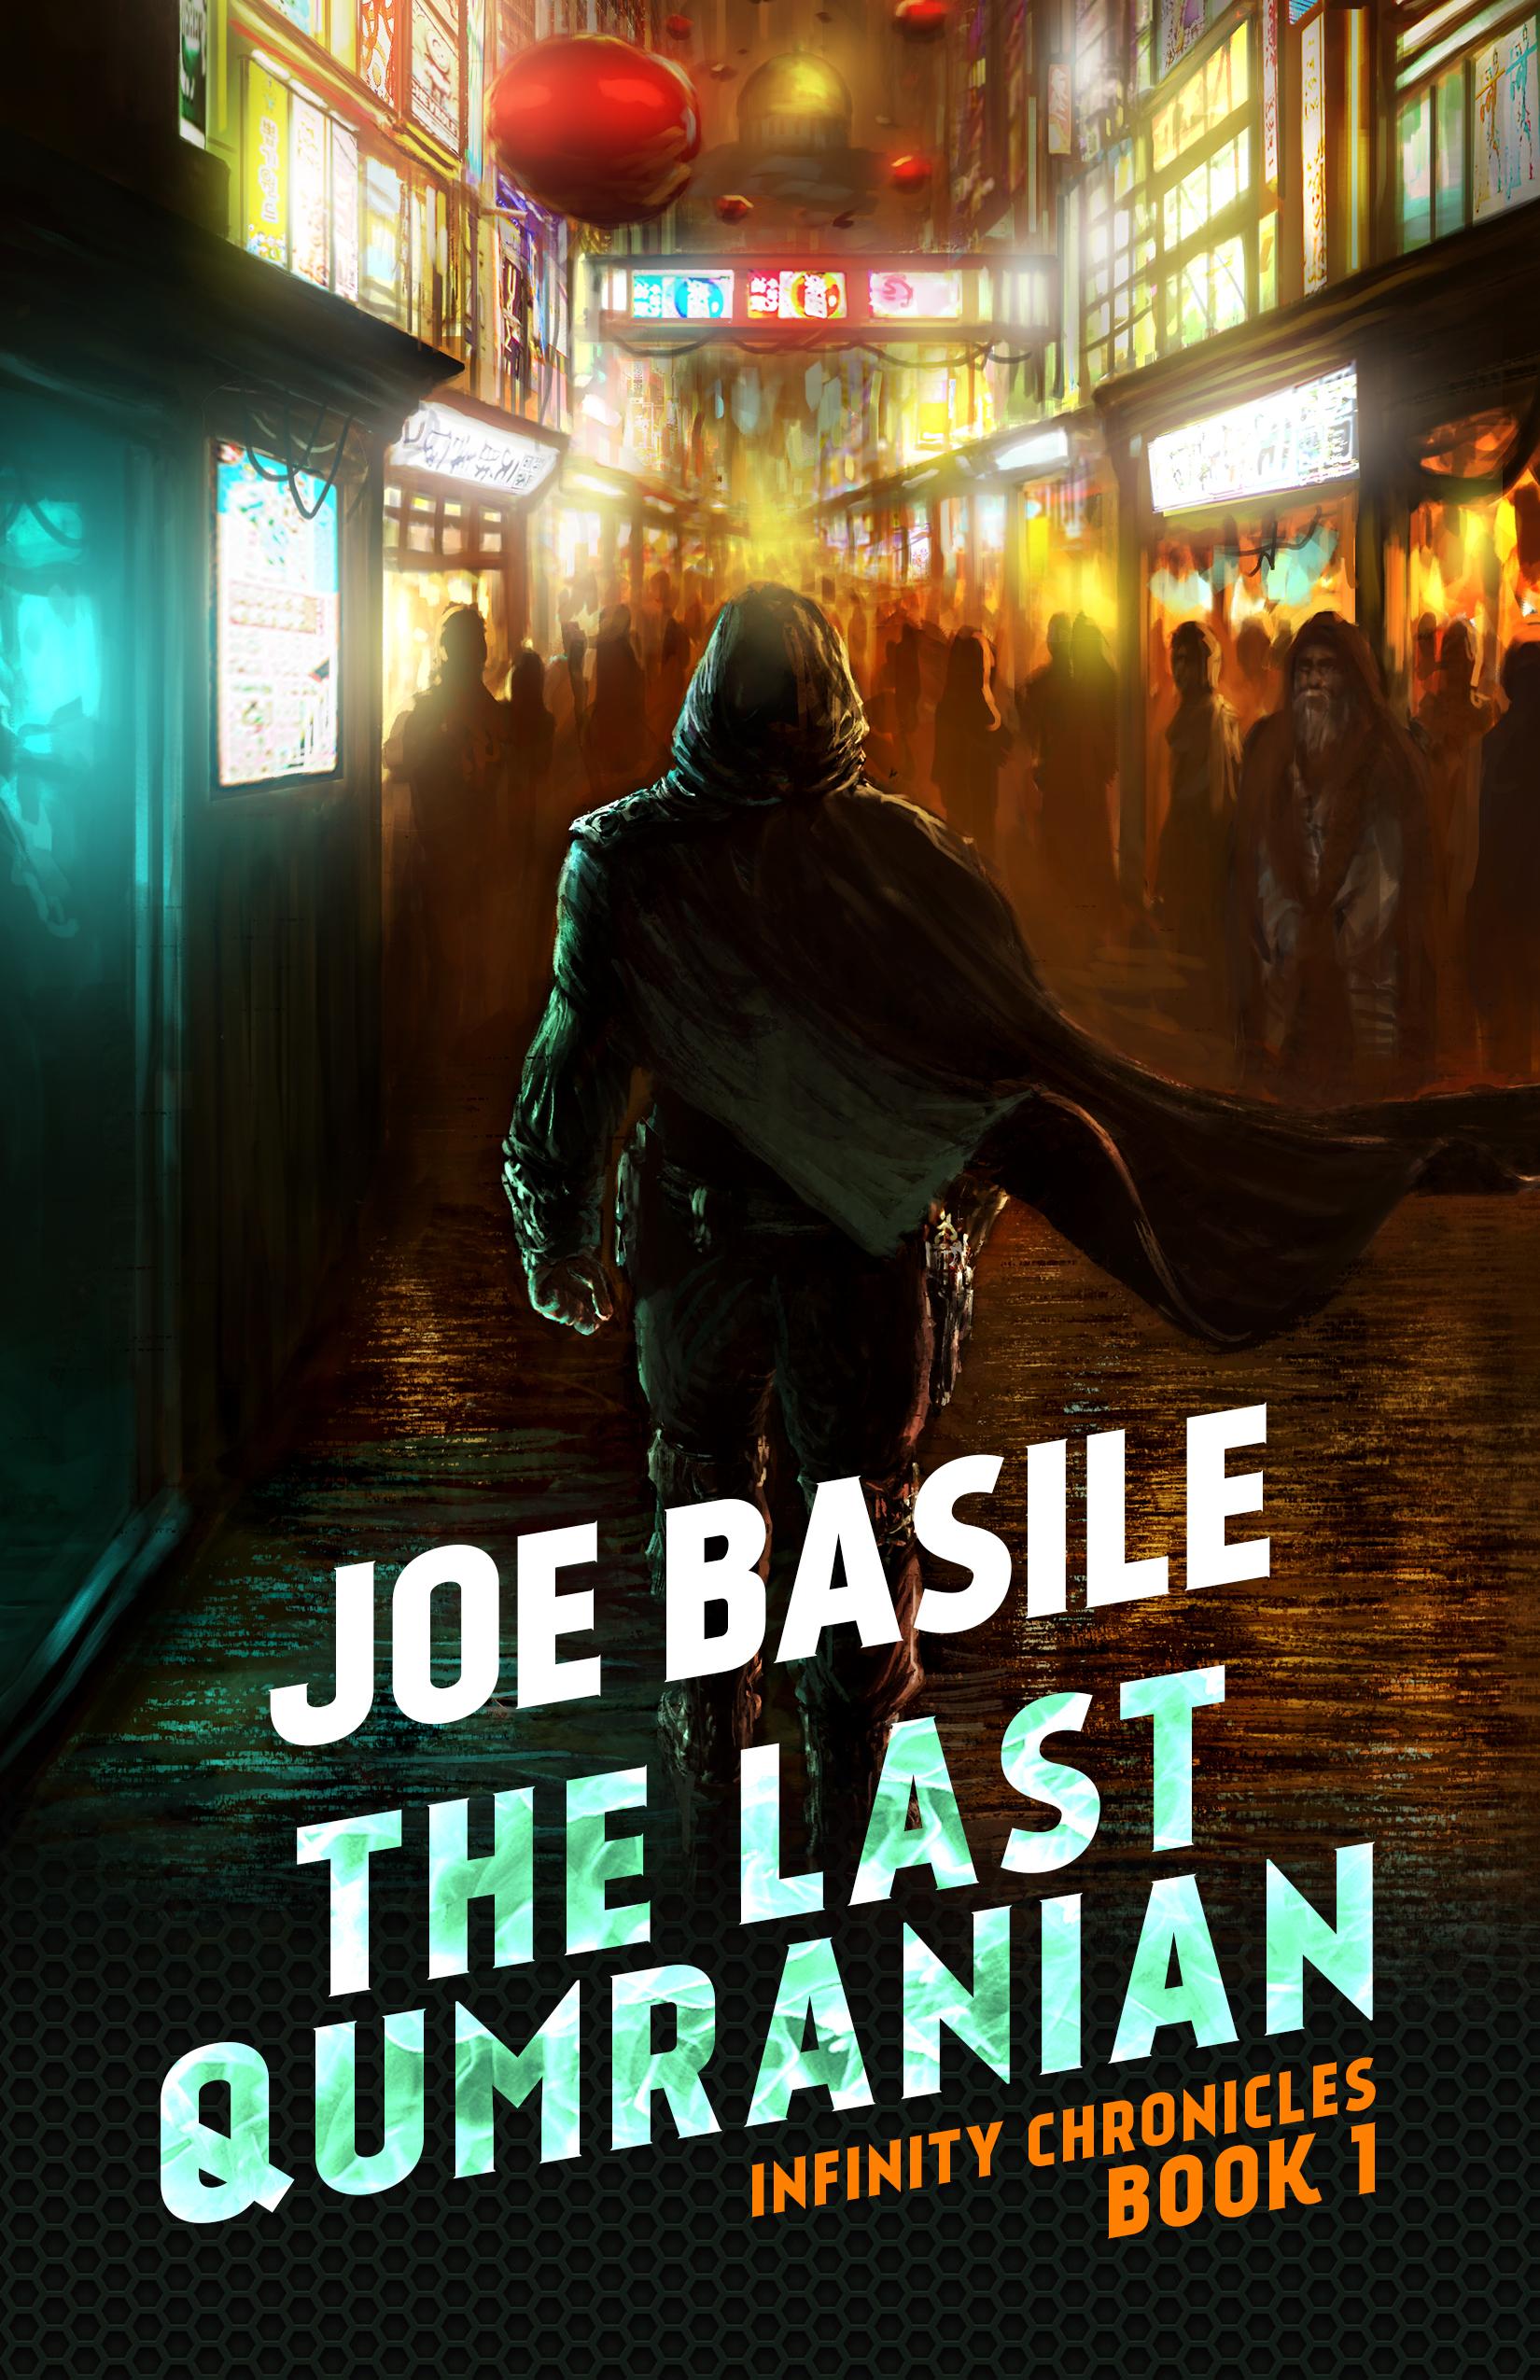 Book Signing & Giveaway with Author Joe Basile